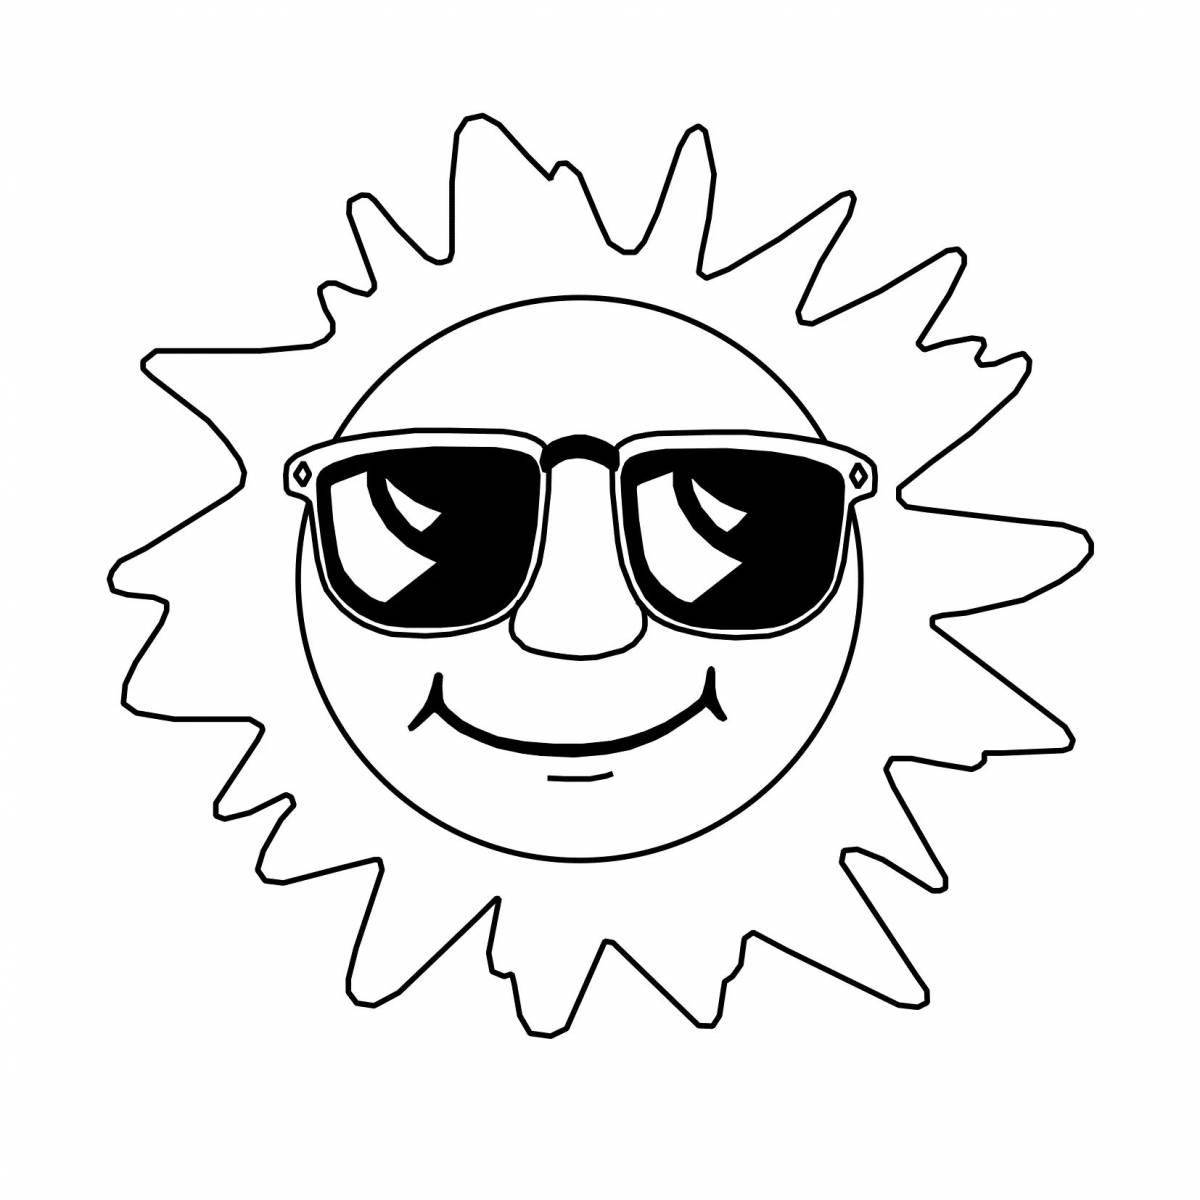 Coloring page with dynamic sun pattern